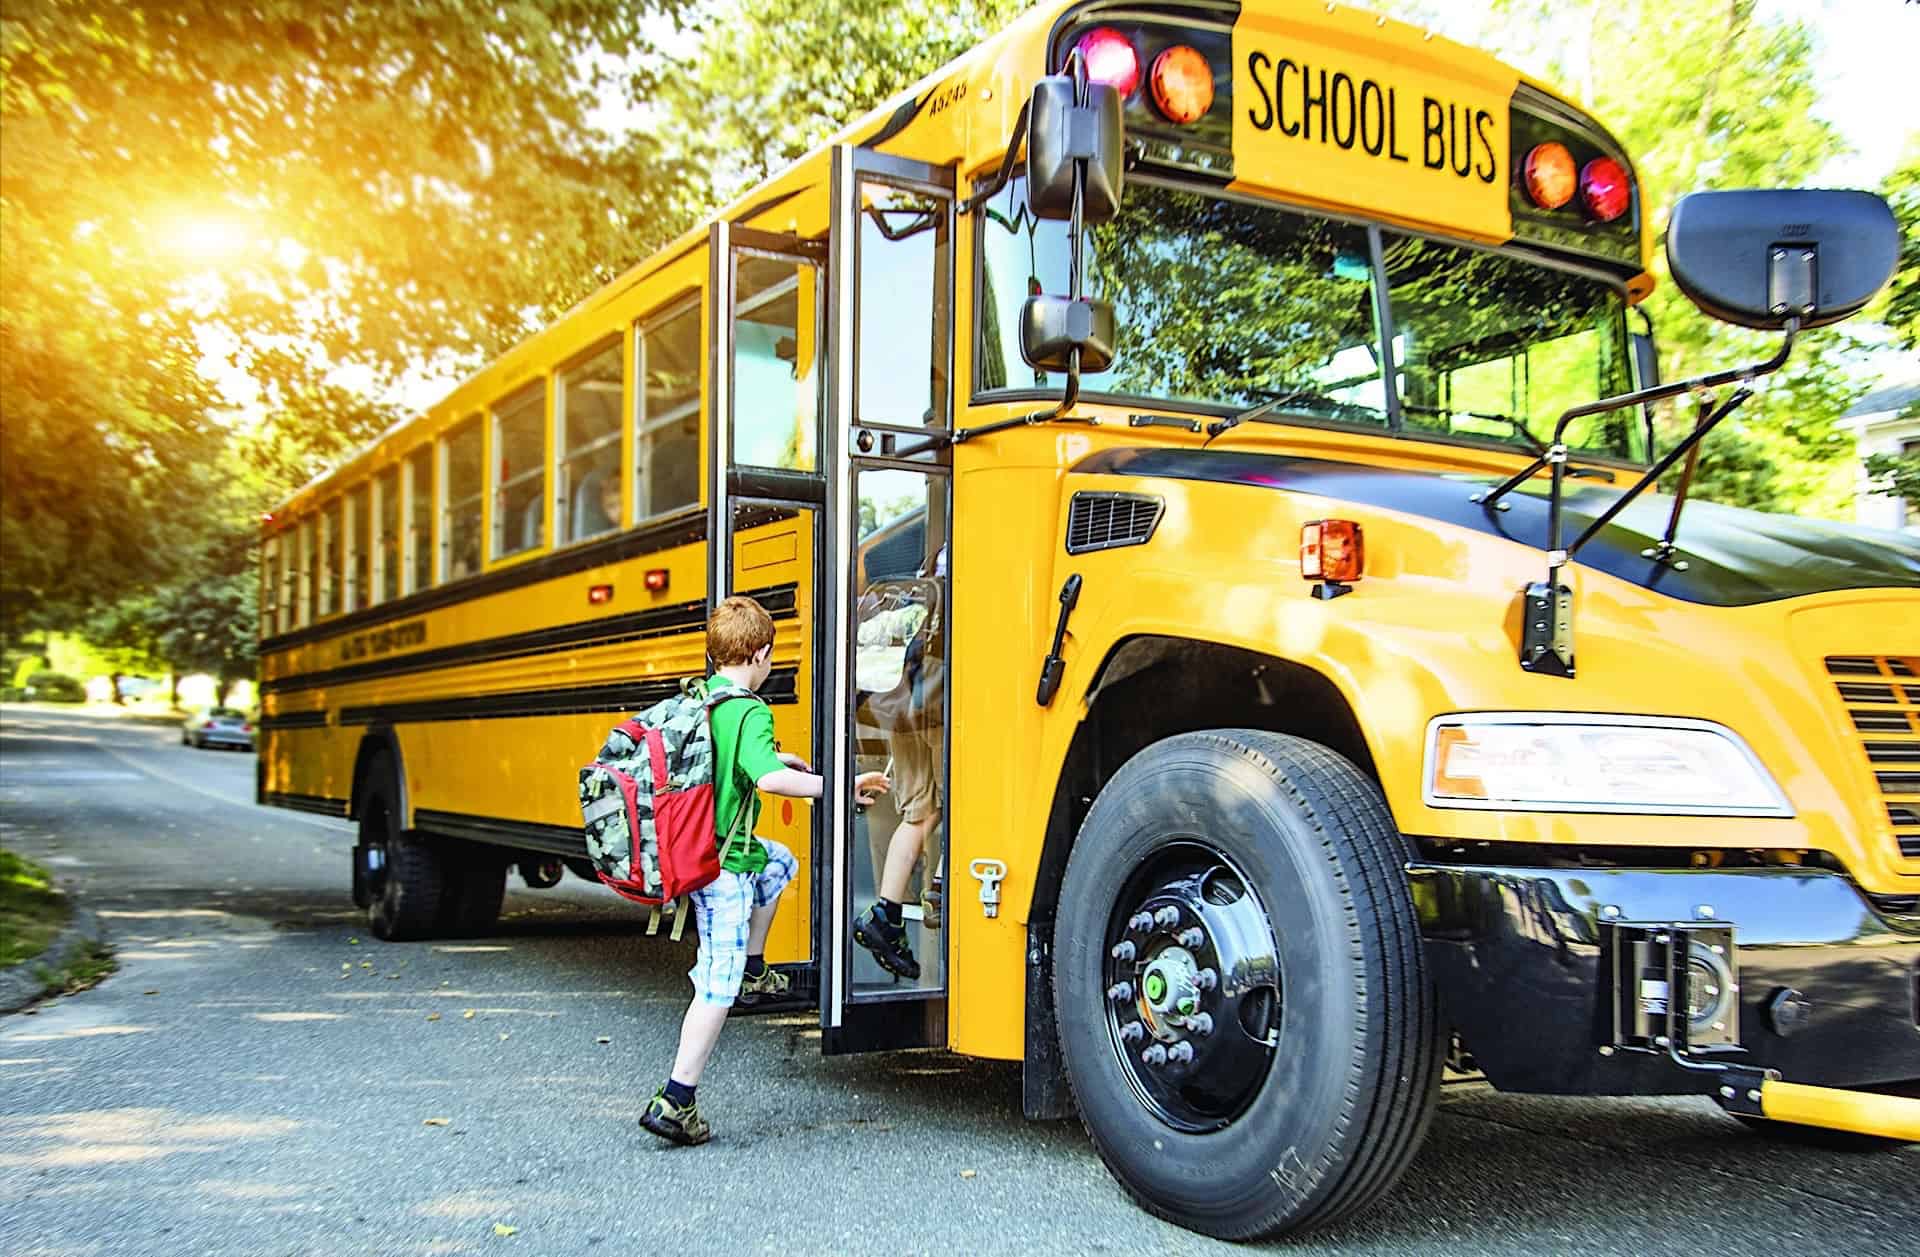 3 Reasons Why Don’t School Buses Have Seat Belts